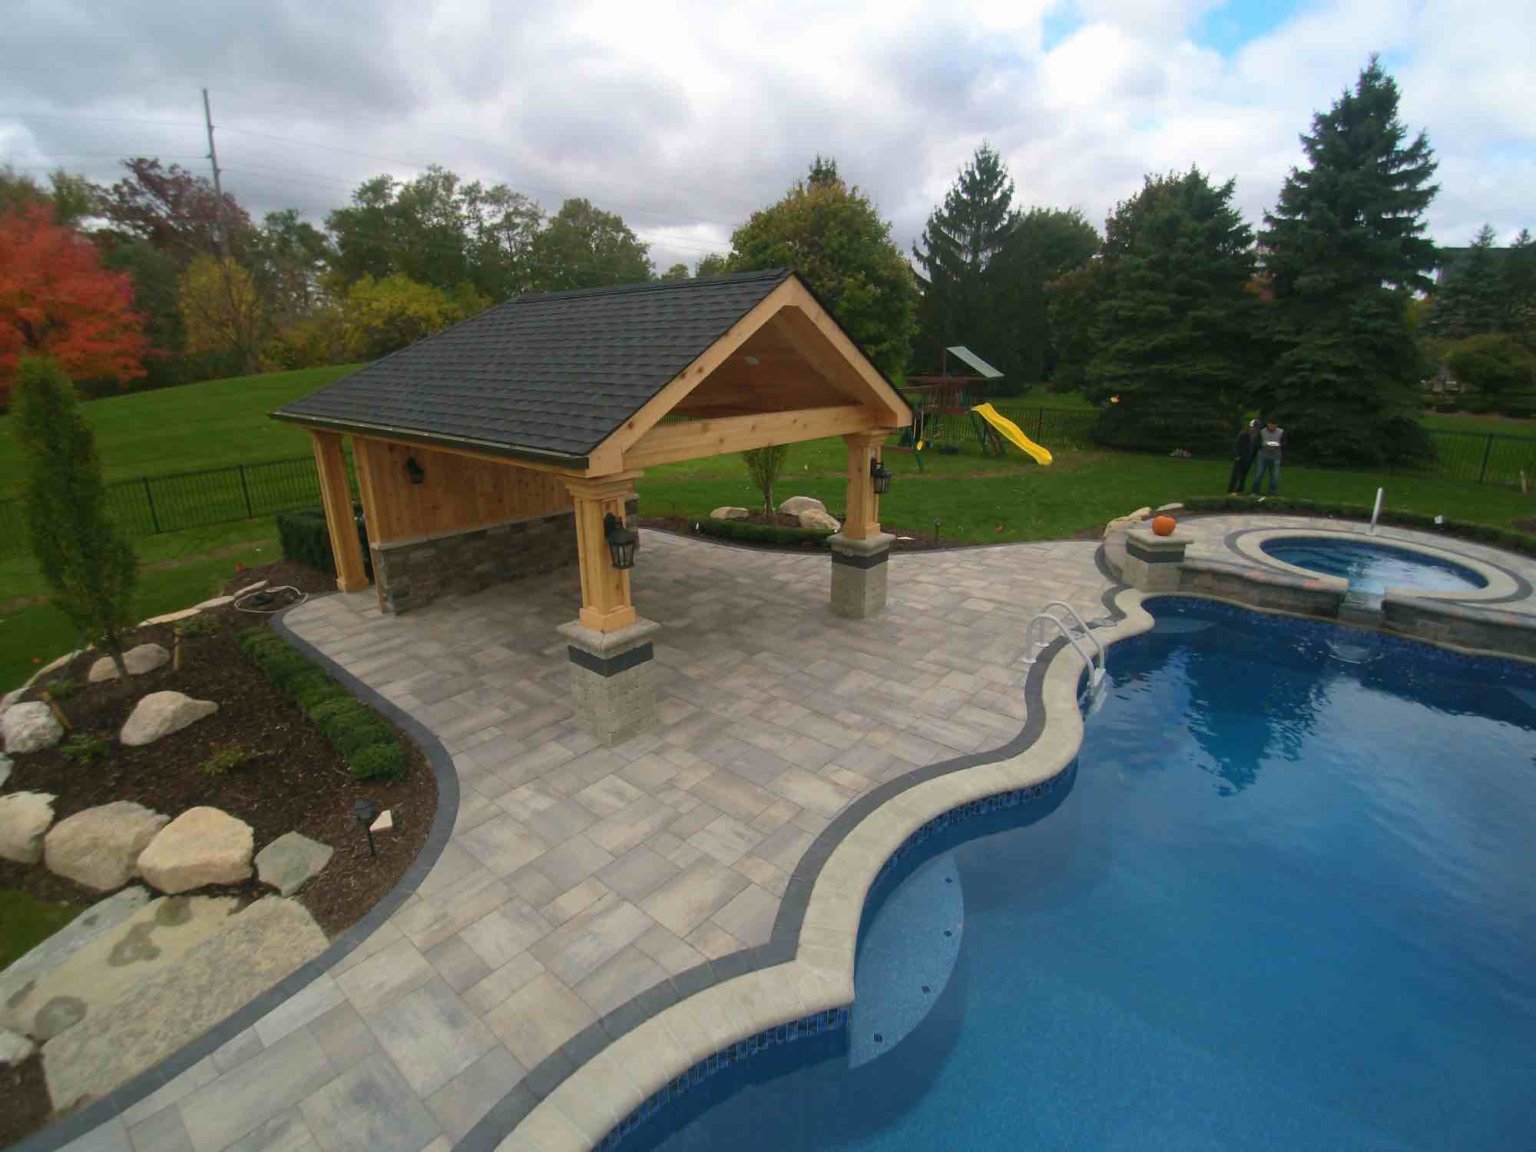 shade structure builders michigan outdoor pavilion patio pavilion pavilion designers mi Michigan Pavers Paver Installation Michigan Paver Contractors in Michigan Best Pavers in Michigan Michigan Patio Pavers Driveway Pavers Michigan Walkway Pavers Michigan Michigan Paver Stones Custom Pavers Michigan Michigan Paver Design